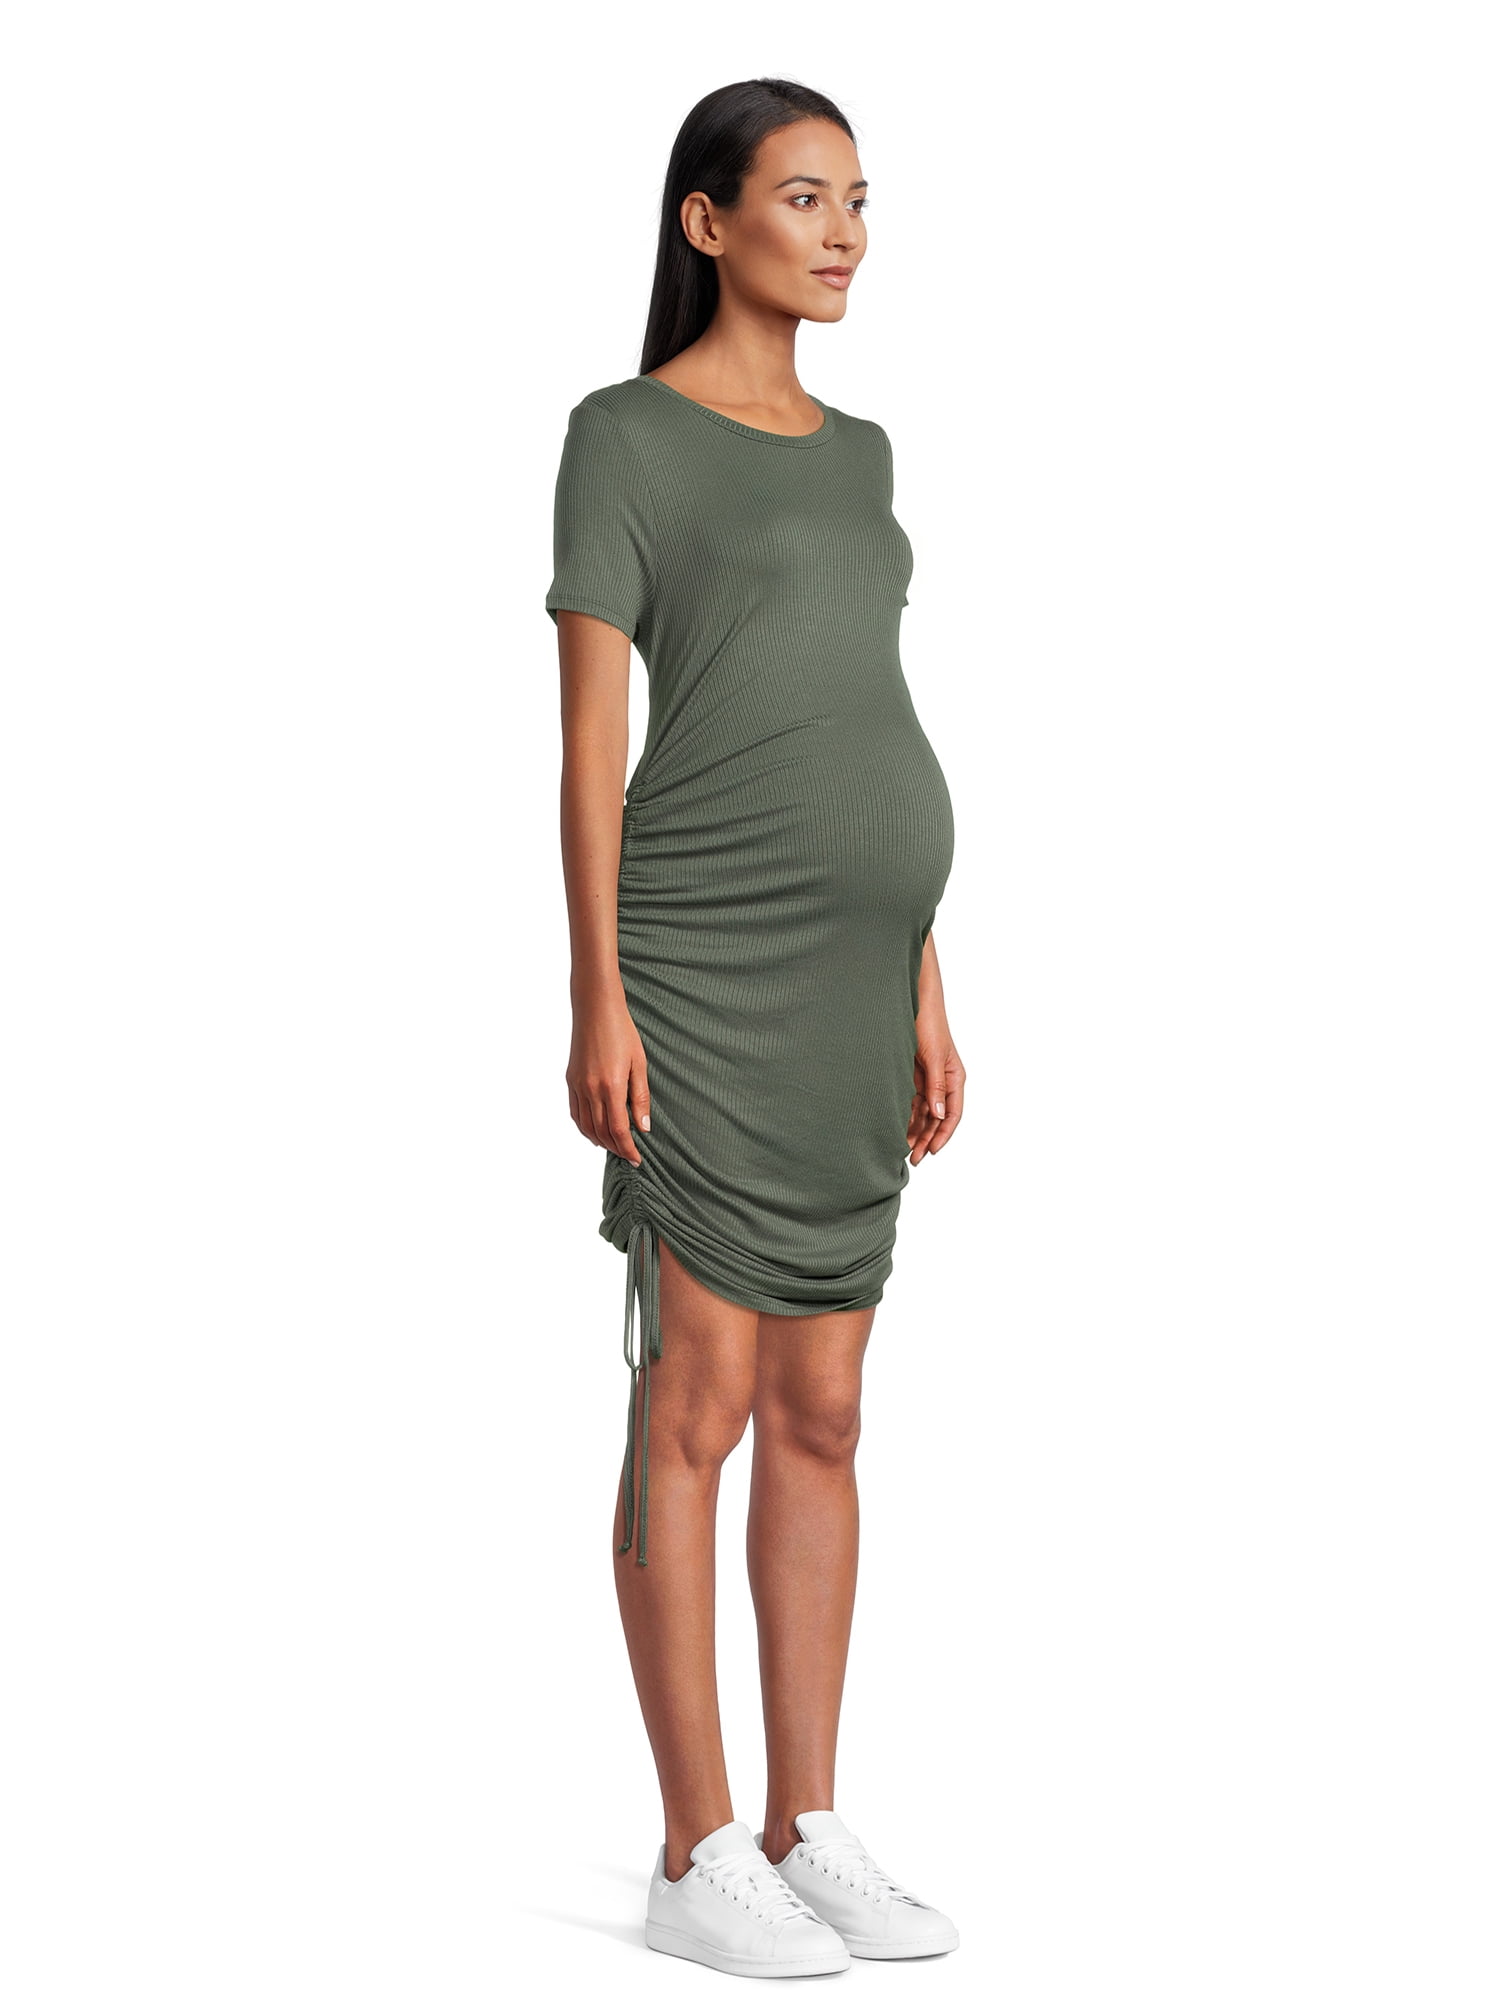 Destination Maternity Women's Ruched Bodycon Dress with Short Sleeves,  Sizes S-2XL 